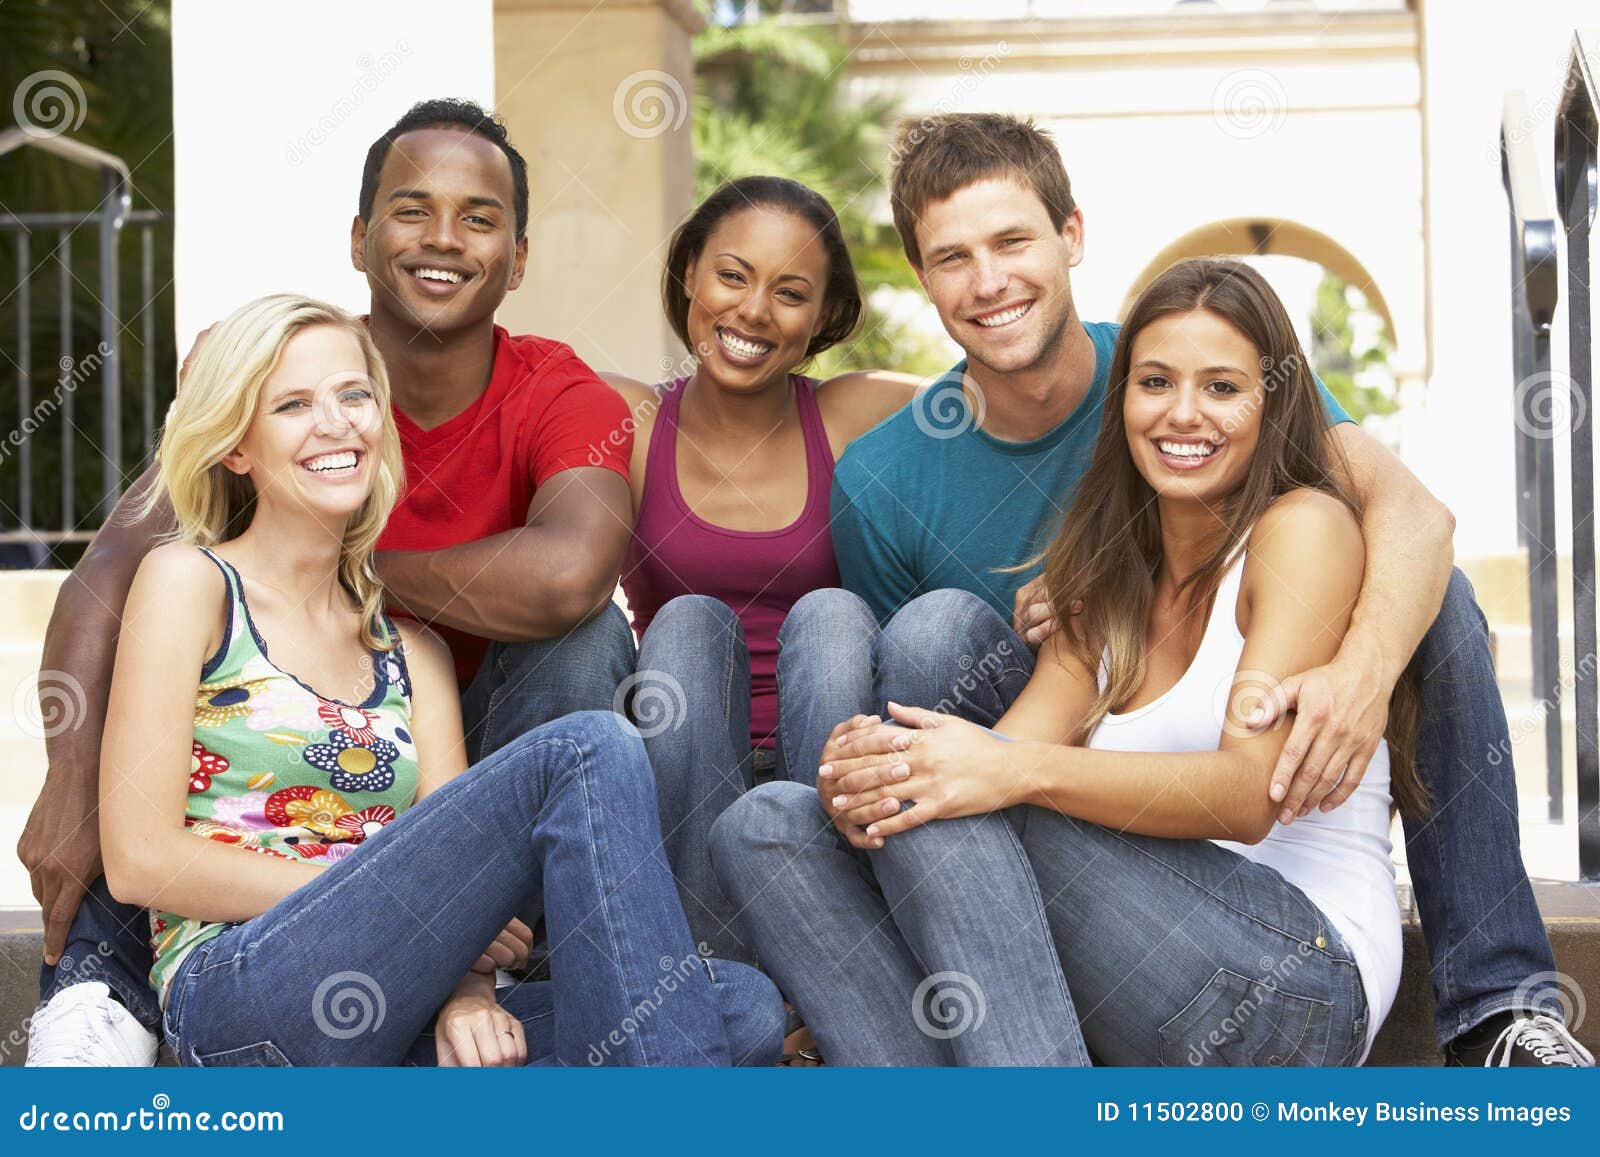 Group of Friends Sitting on Steps of Building Stock Photo - Image of ...